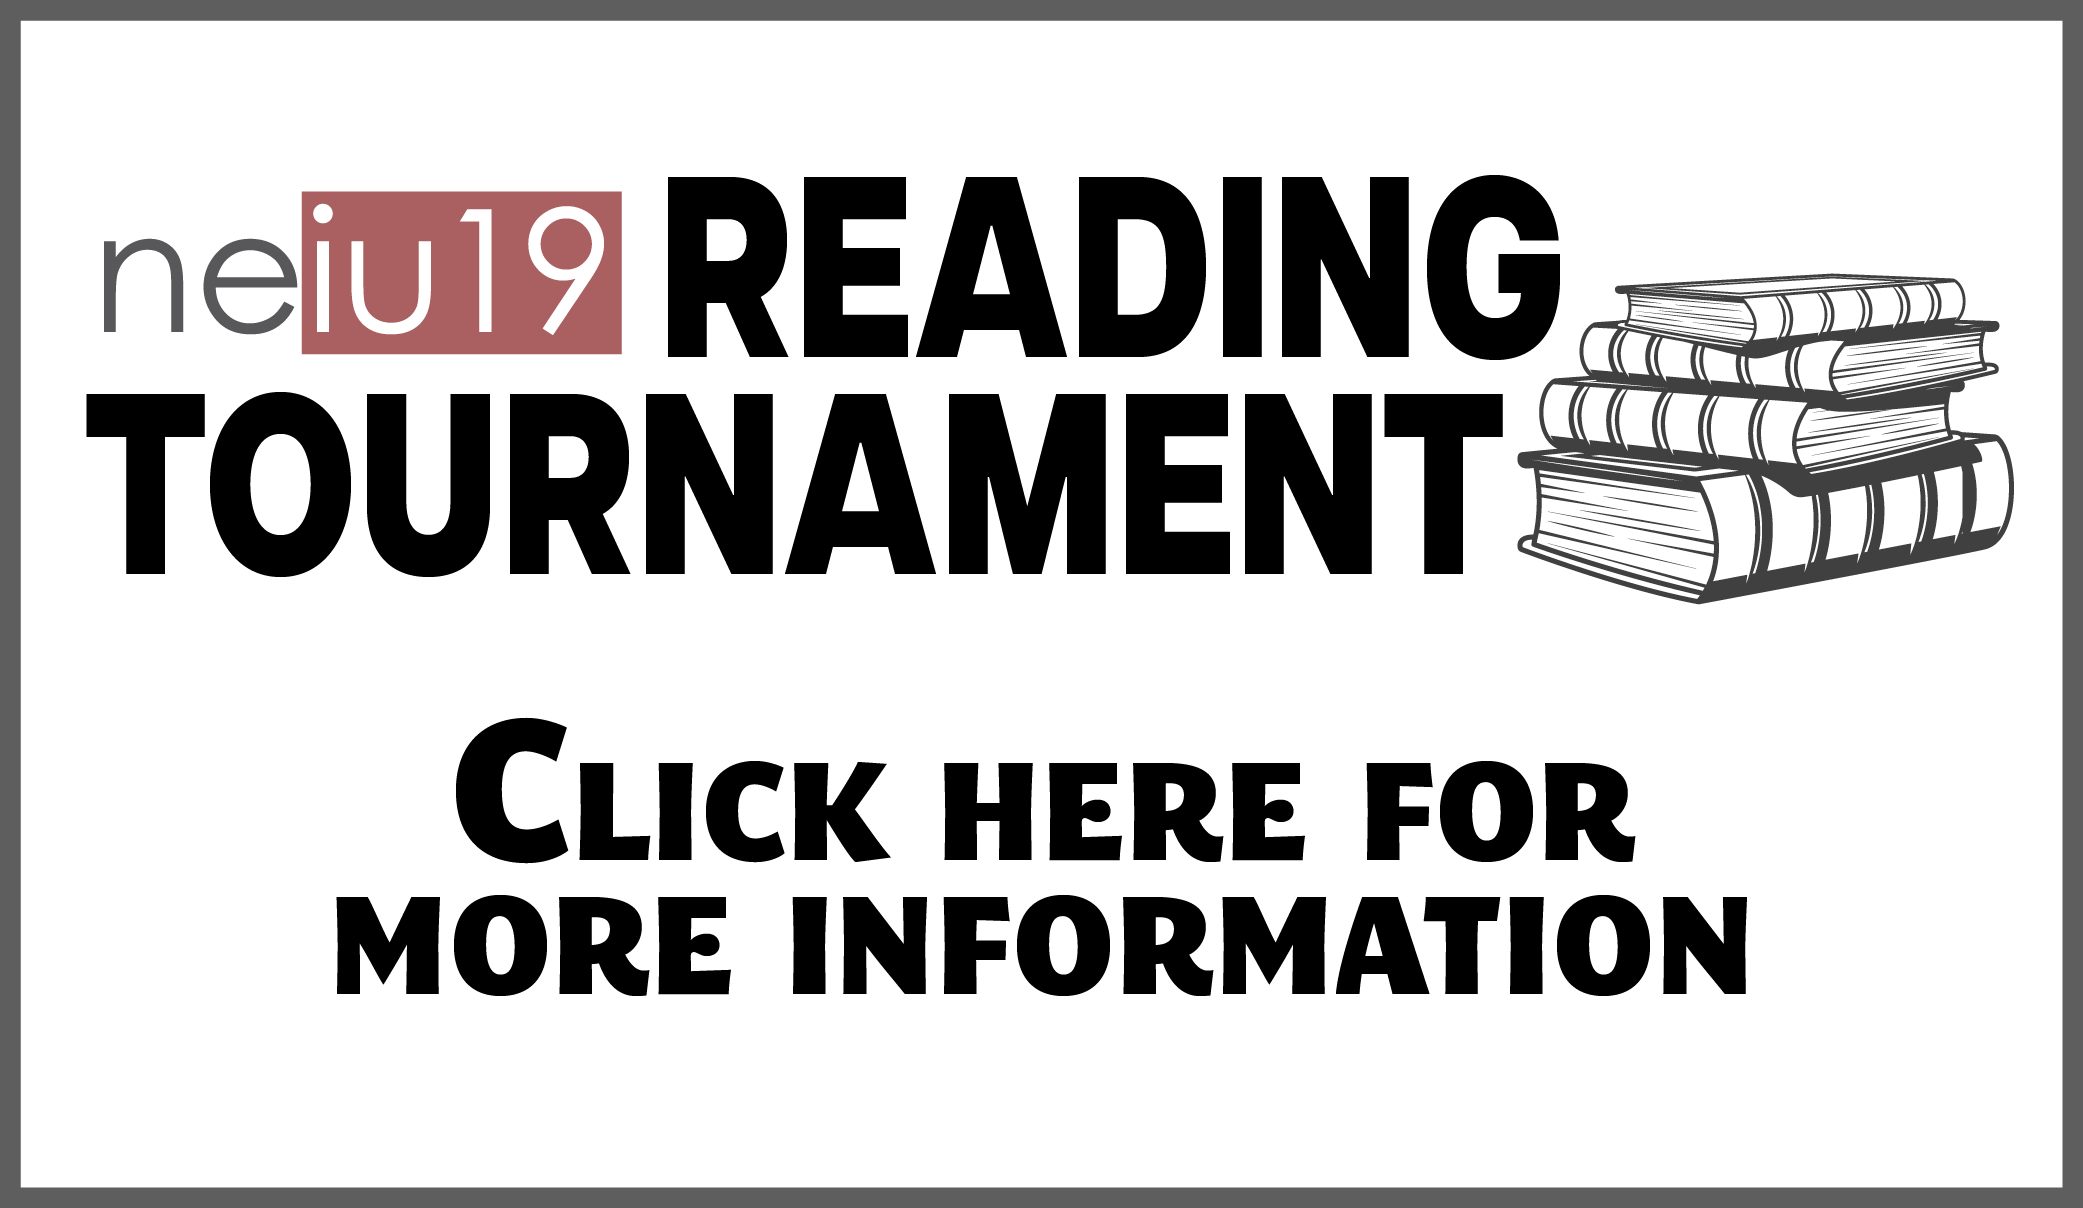 Reading Tournament Click here for more info